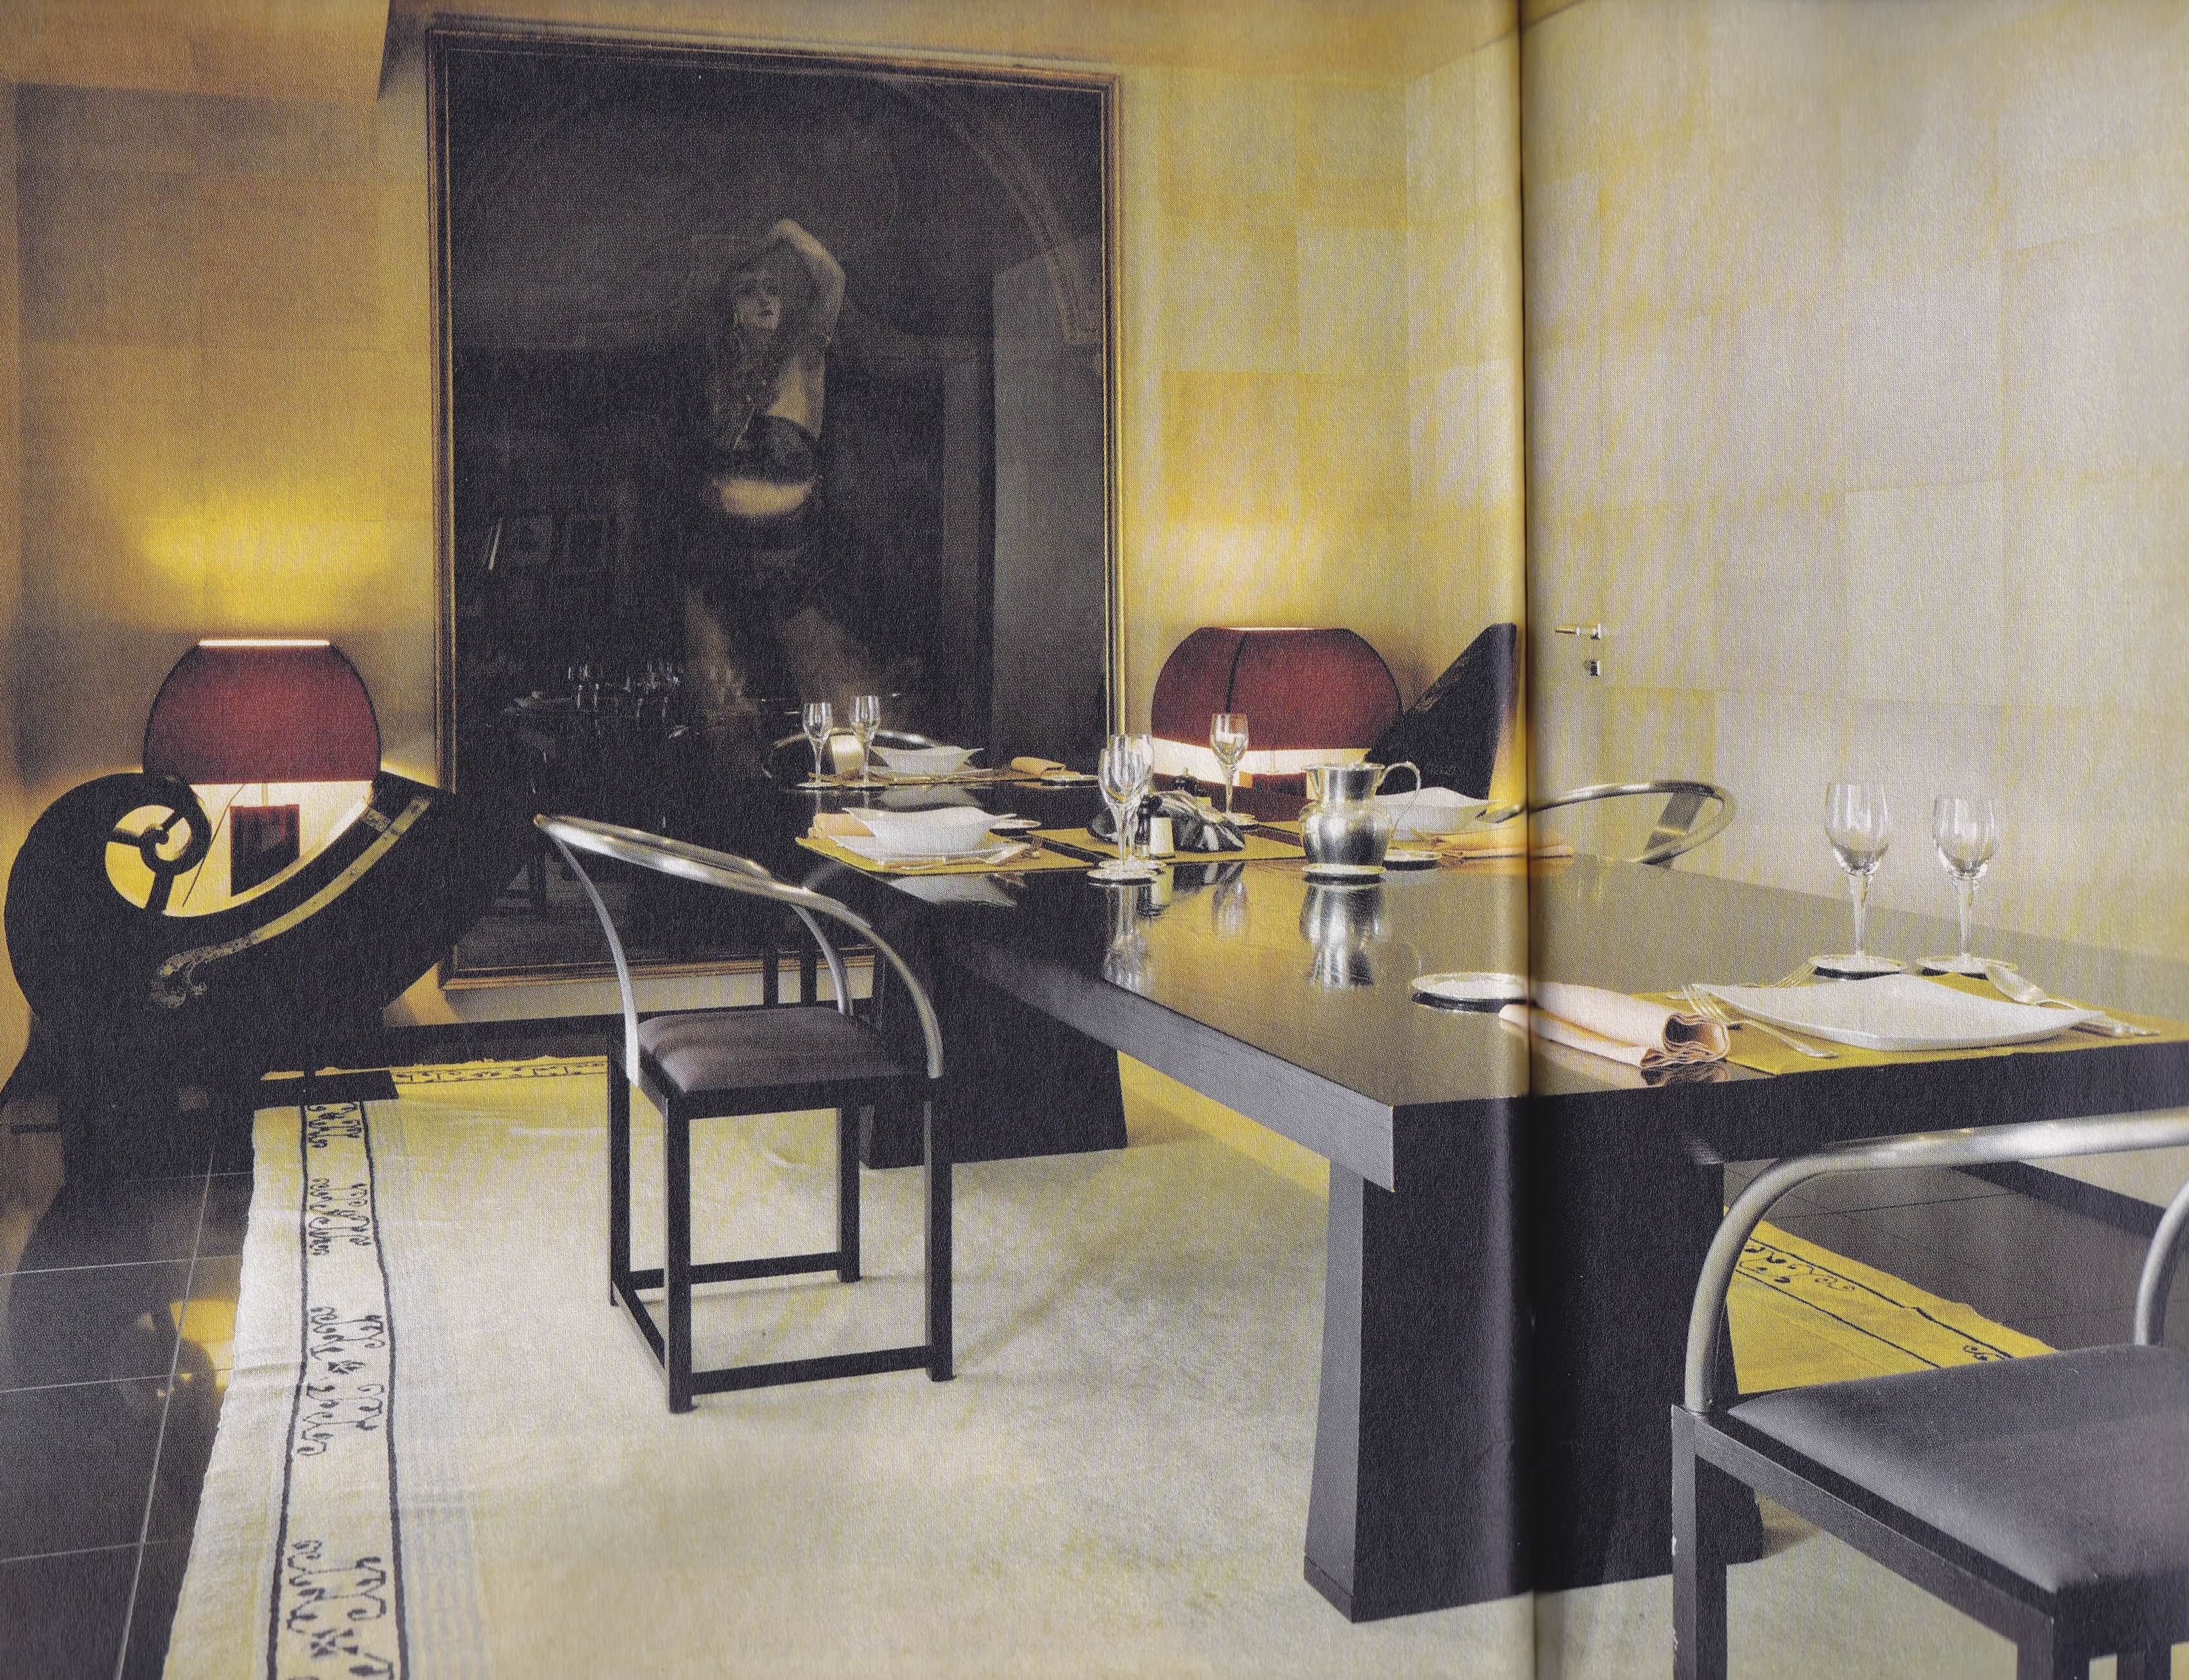 The dining room in Armani's Milanese palazzo apartment designed by